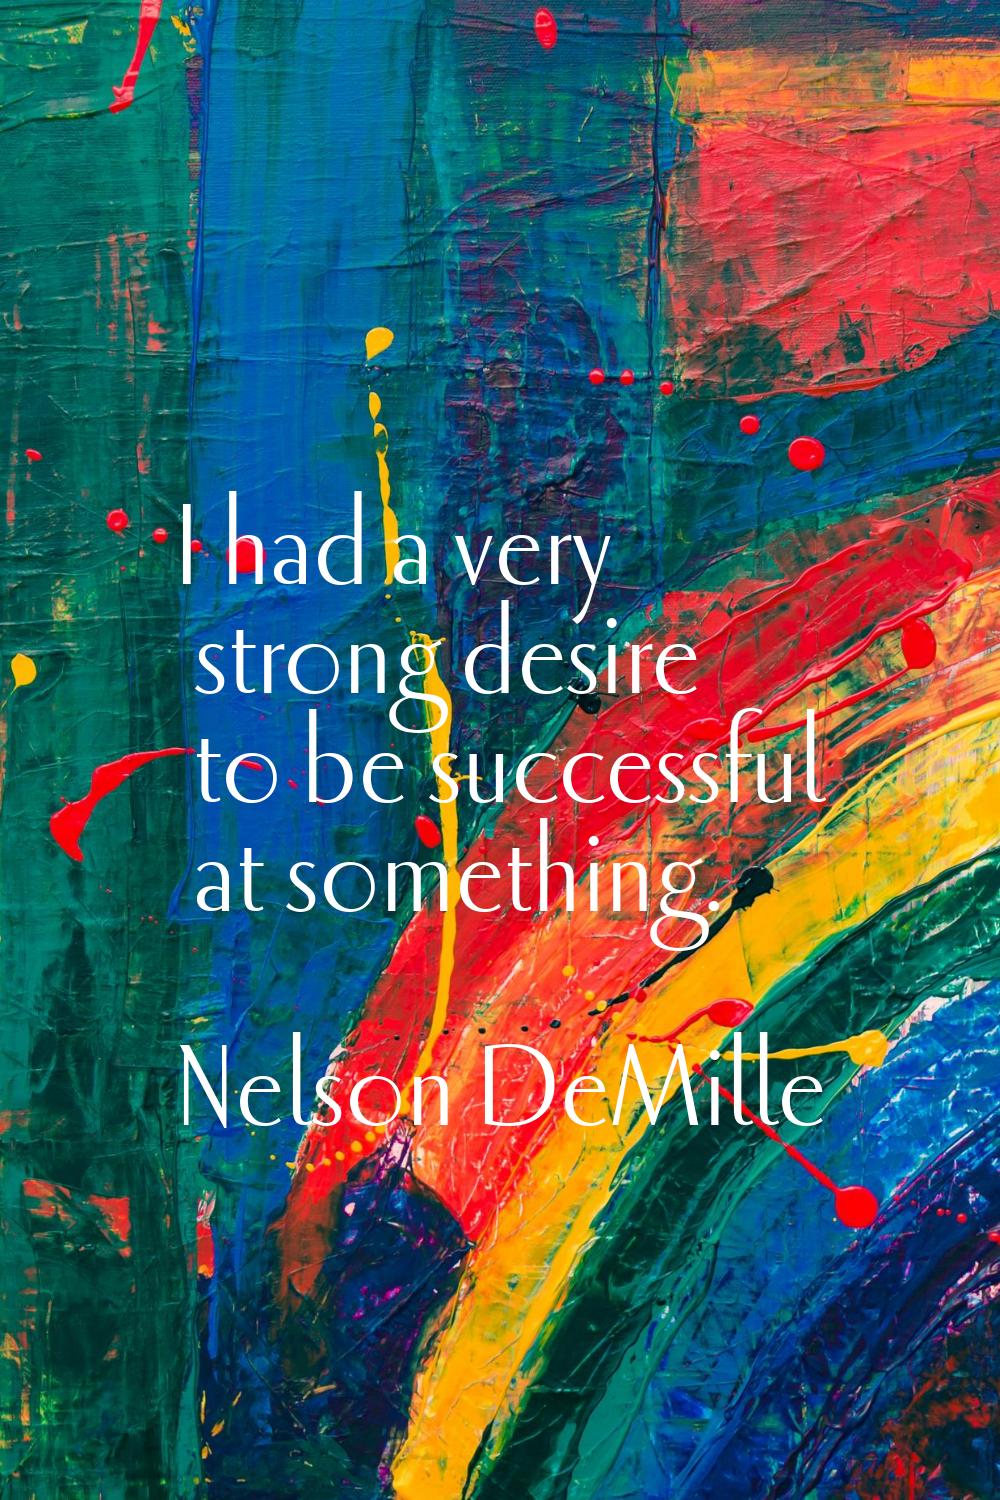 I had a very strong desire to be successful at something.